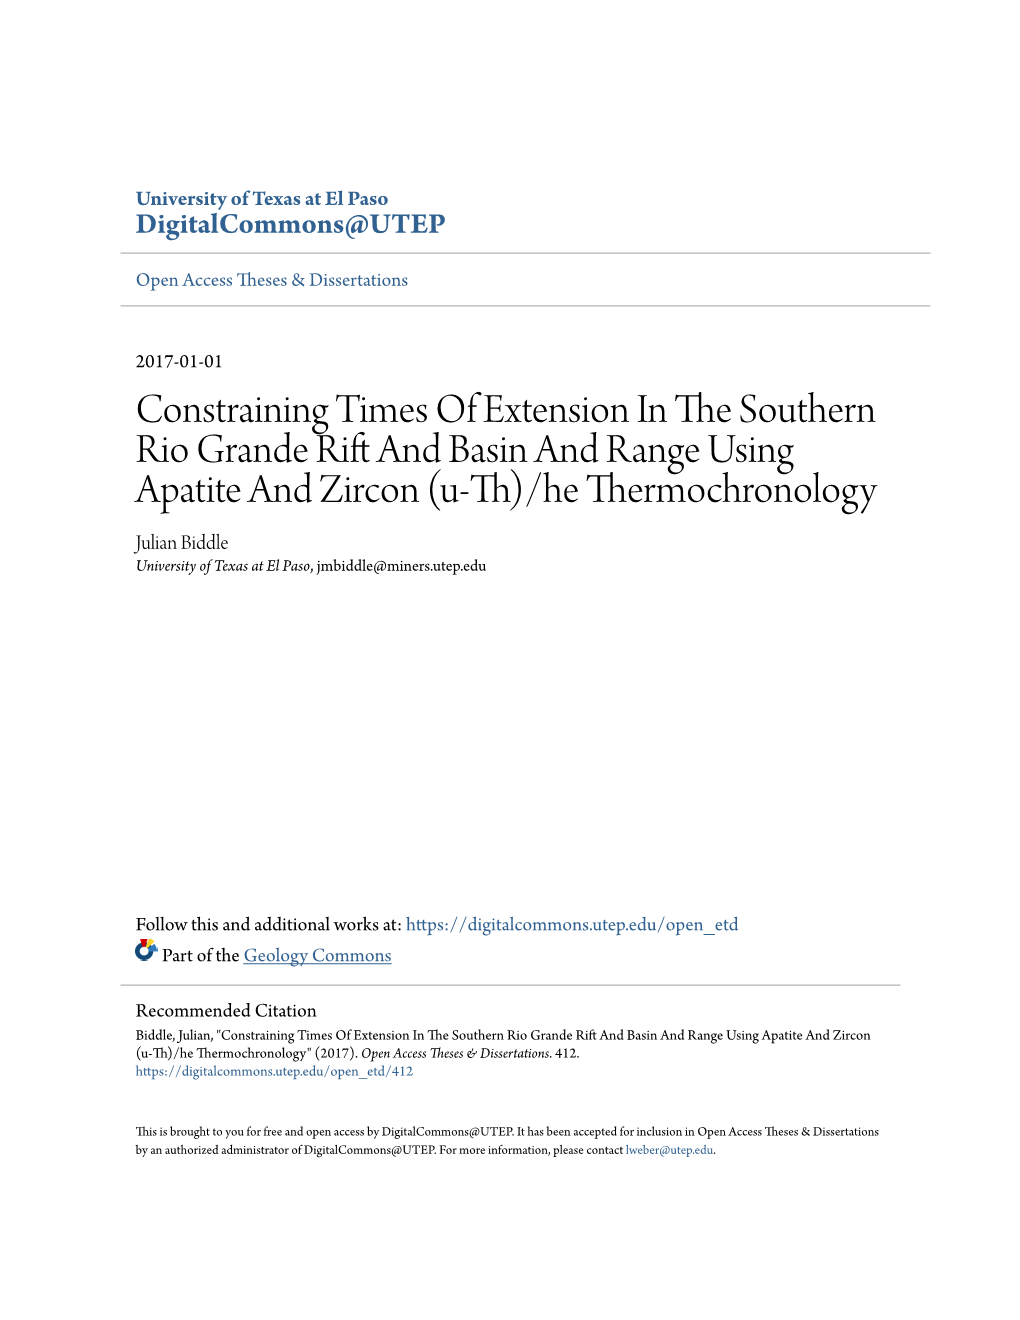 Constraining Times of Extension in The